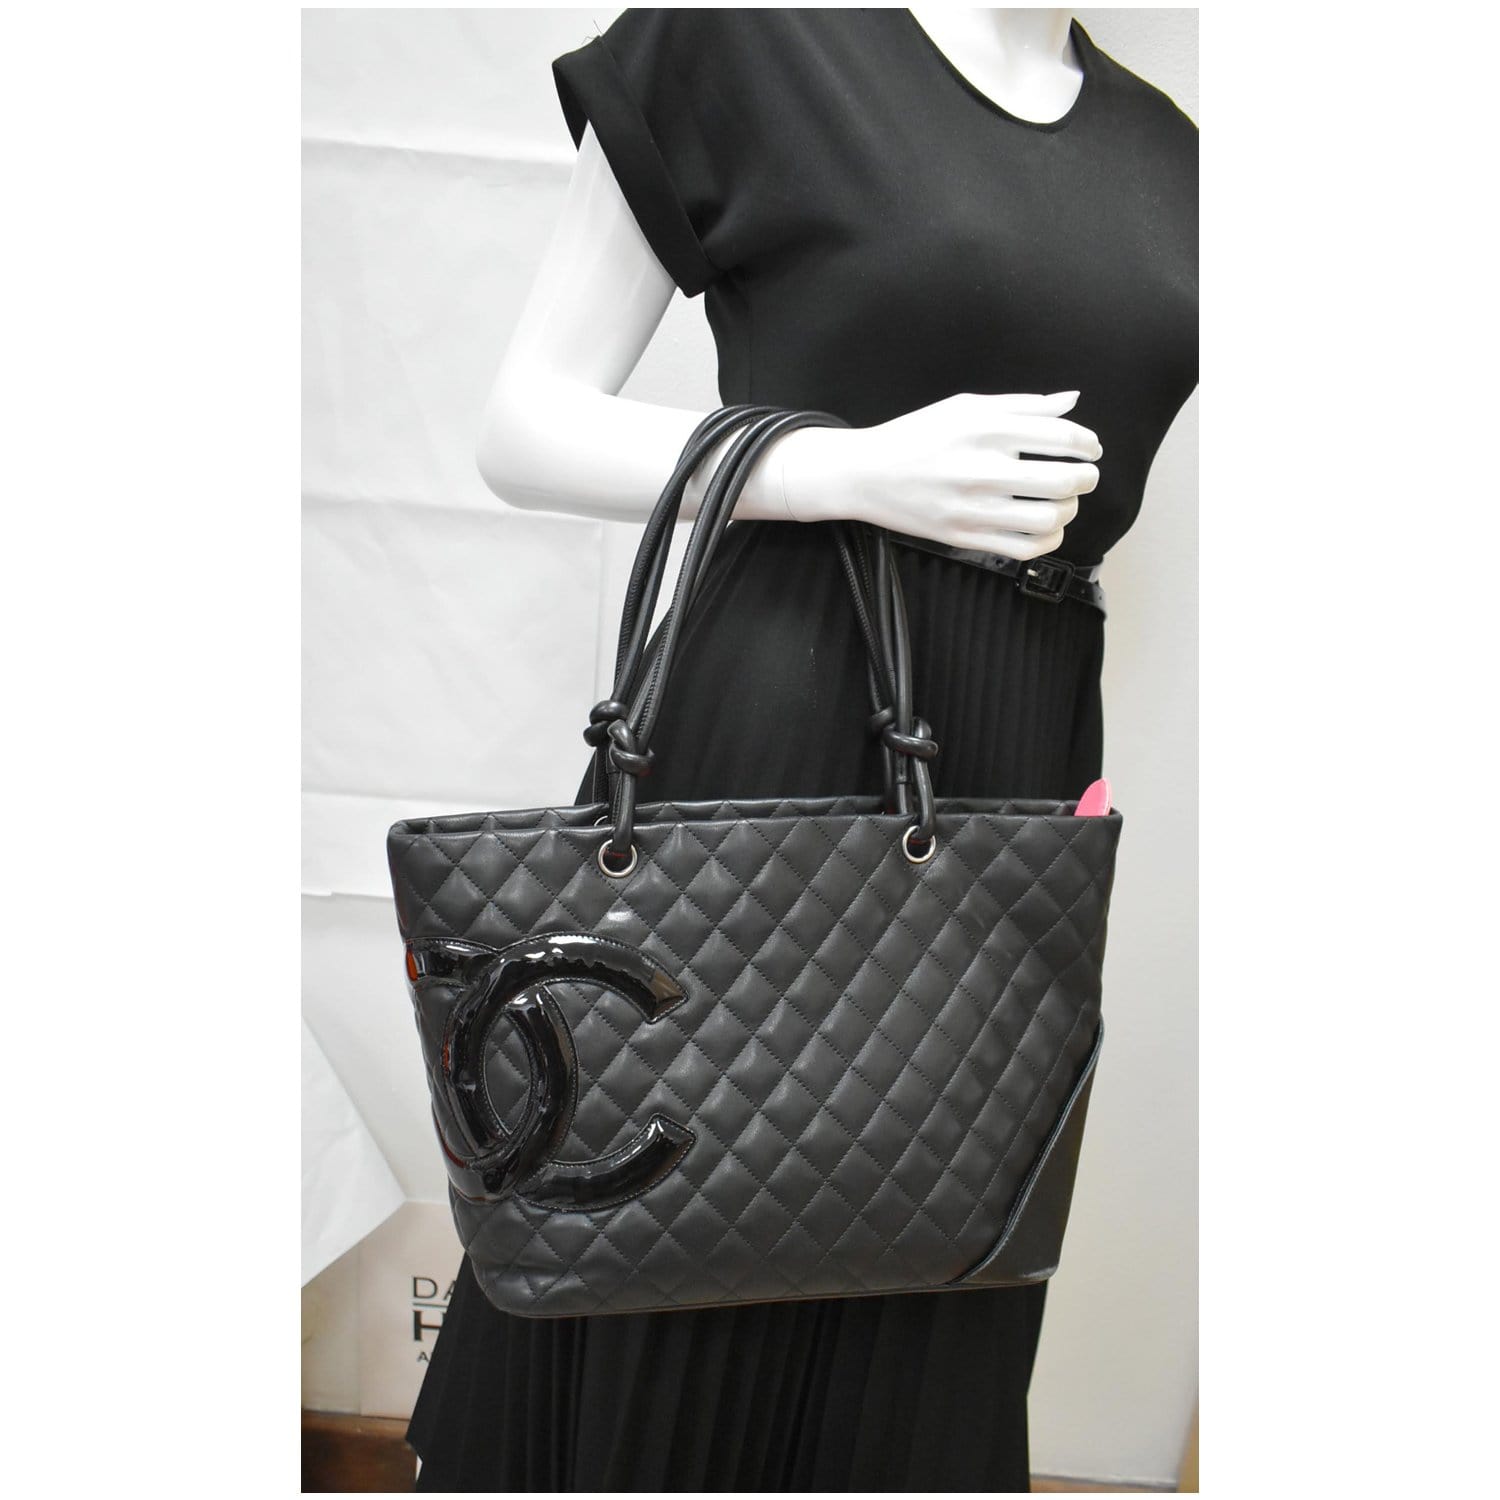 black chanel bag with white cc